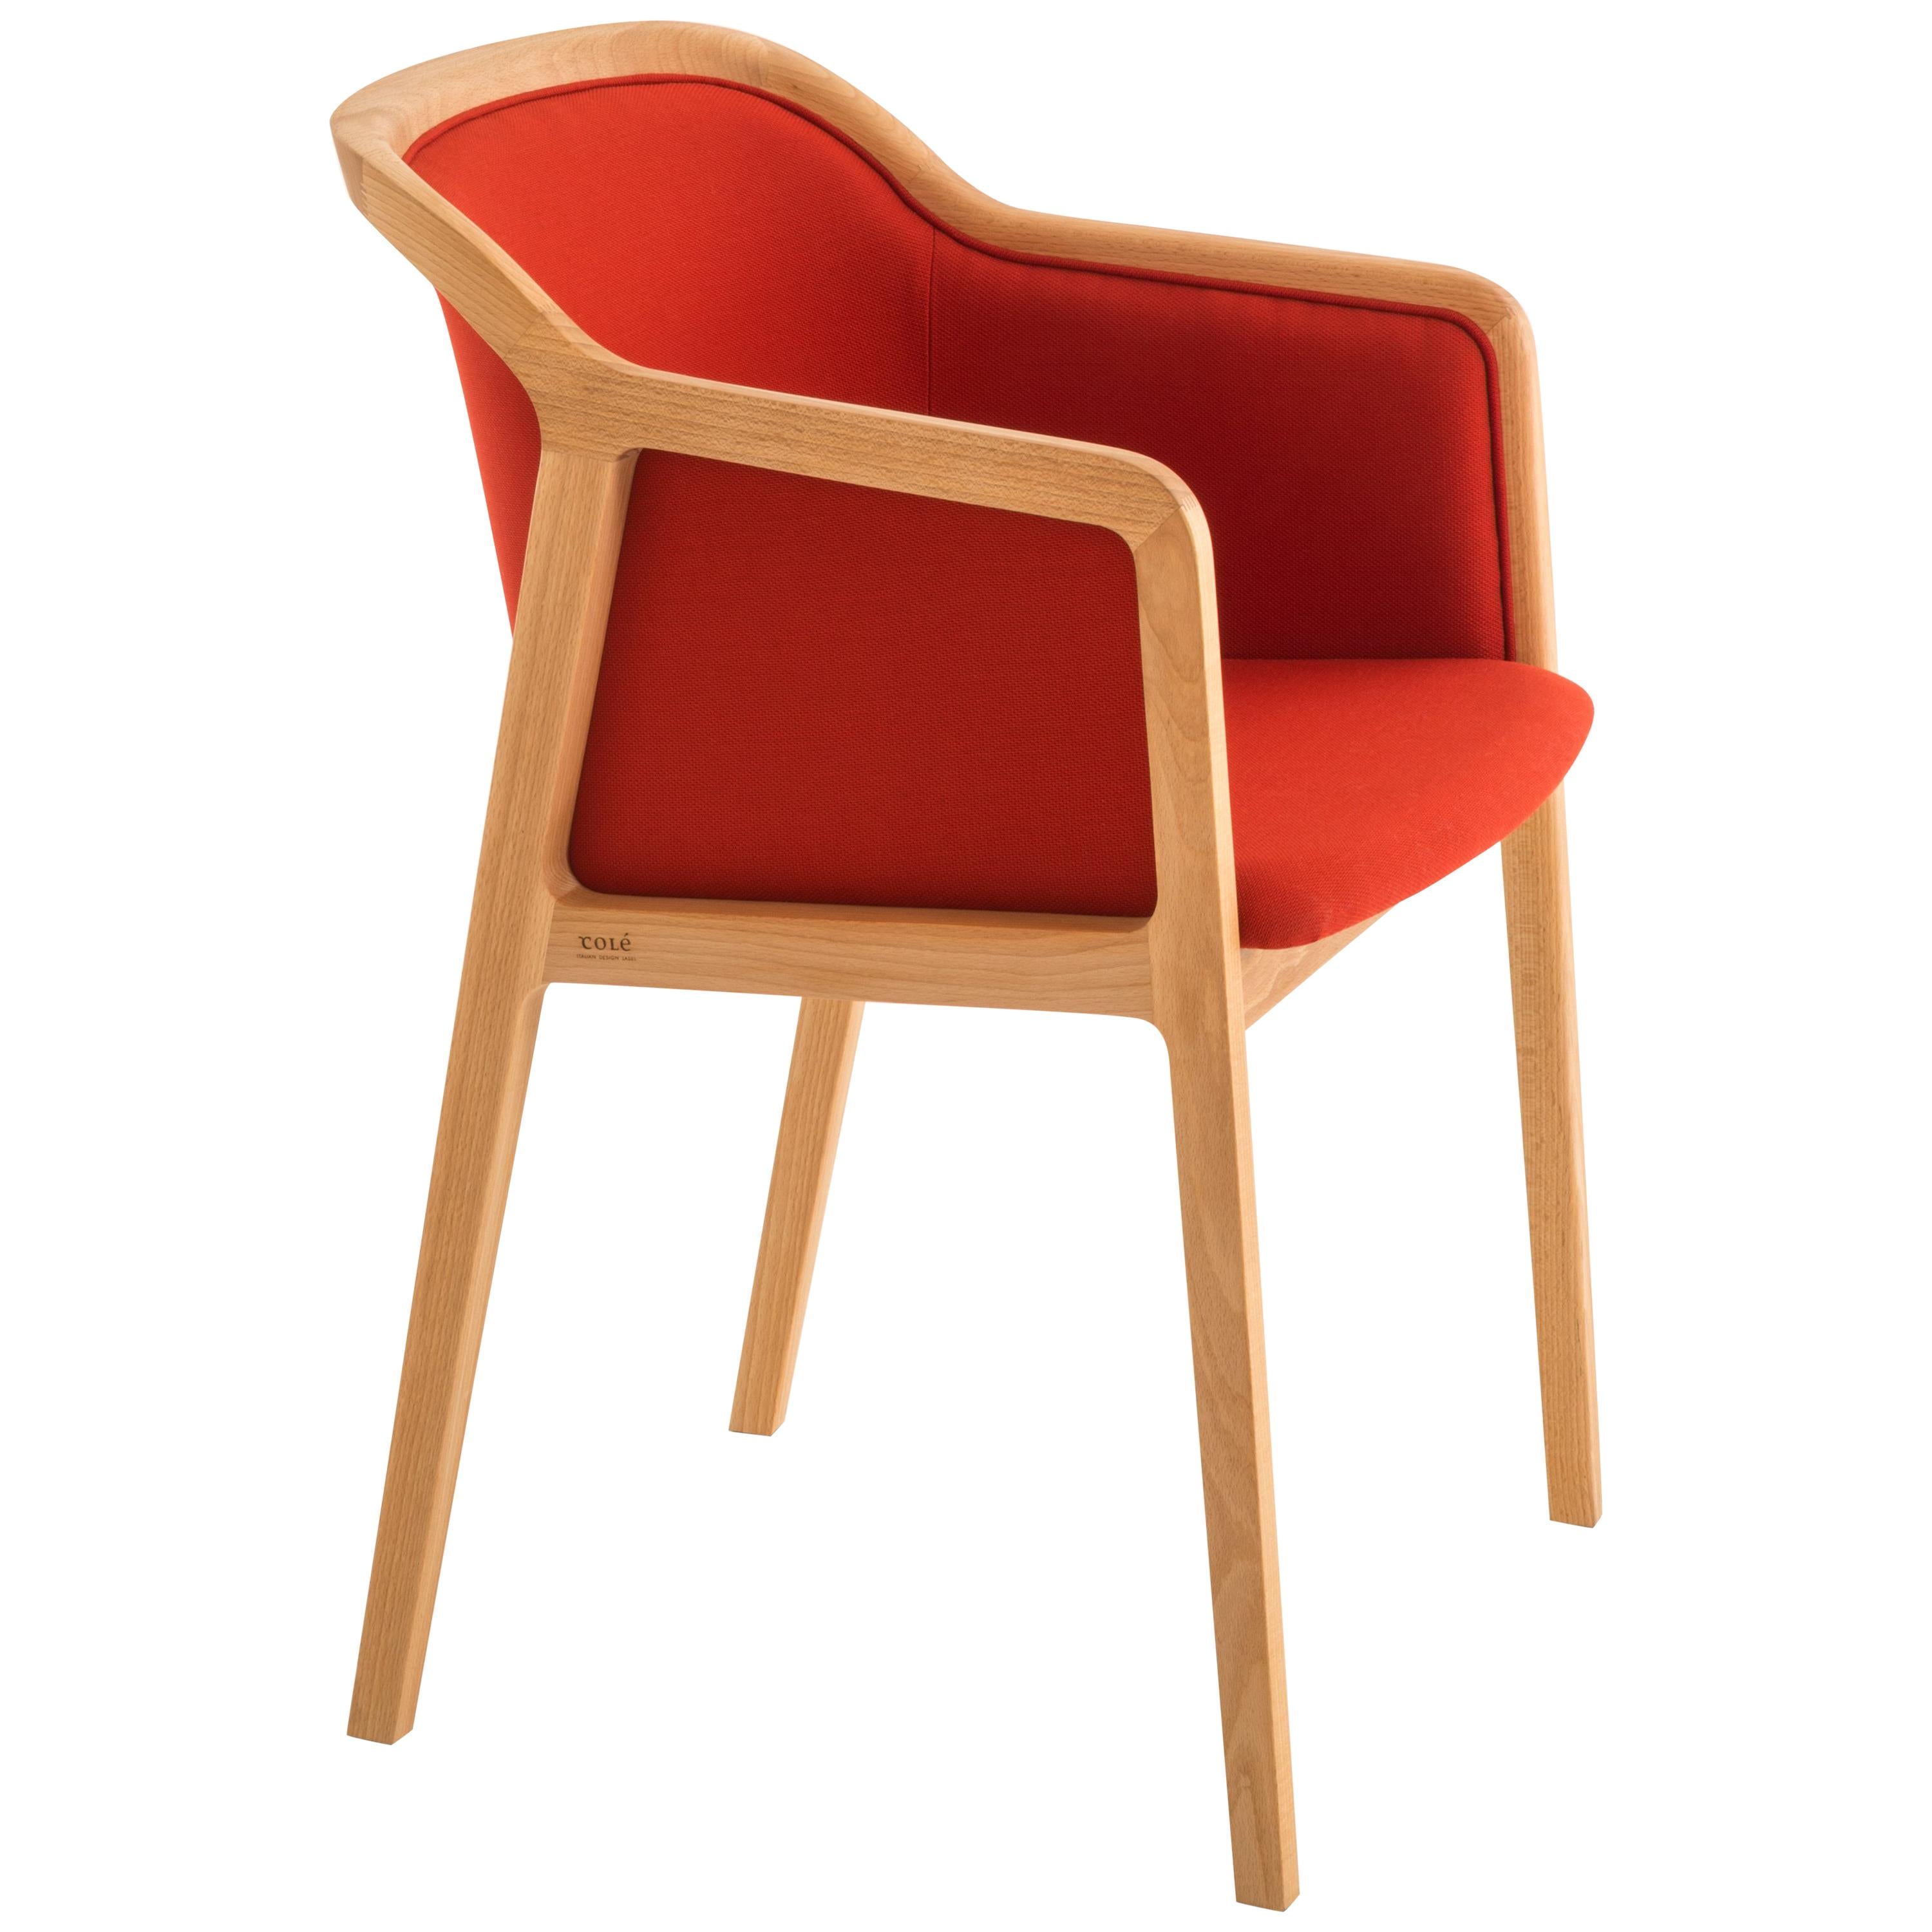 Vienna Soft Little Armchair, Contemporary Design Inspired by Traditional Chairs